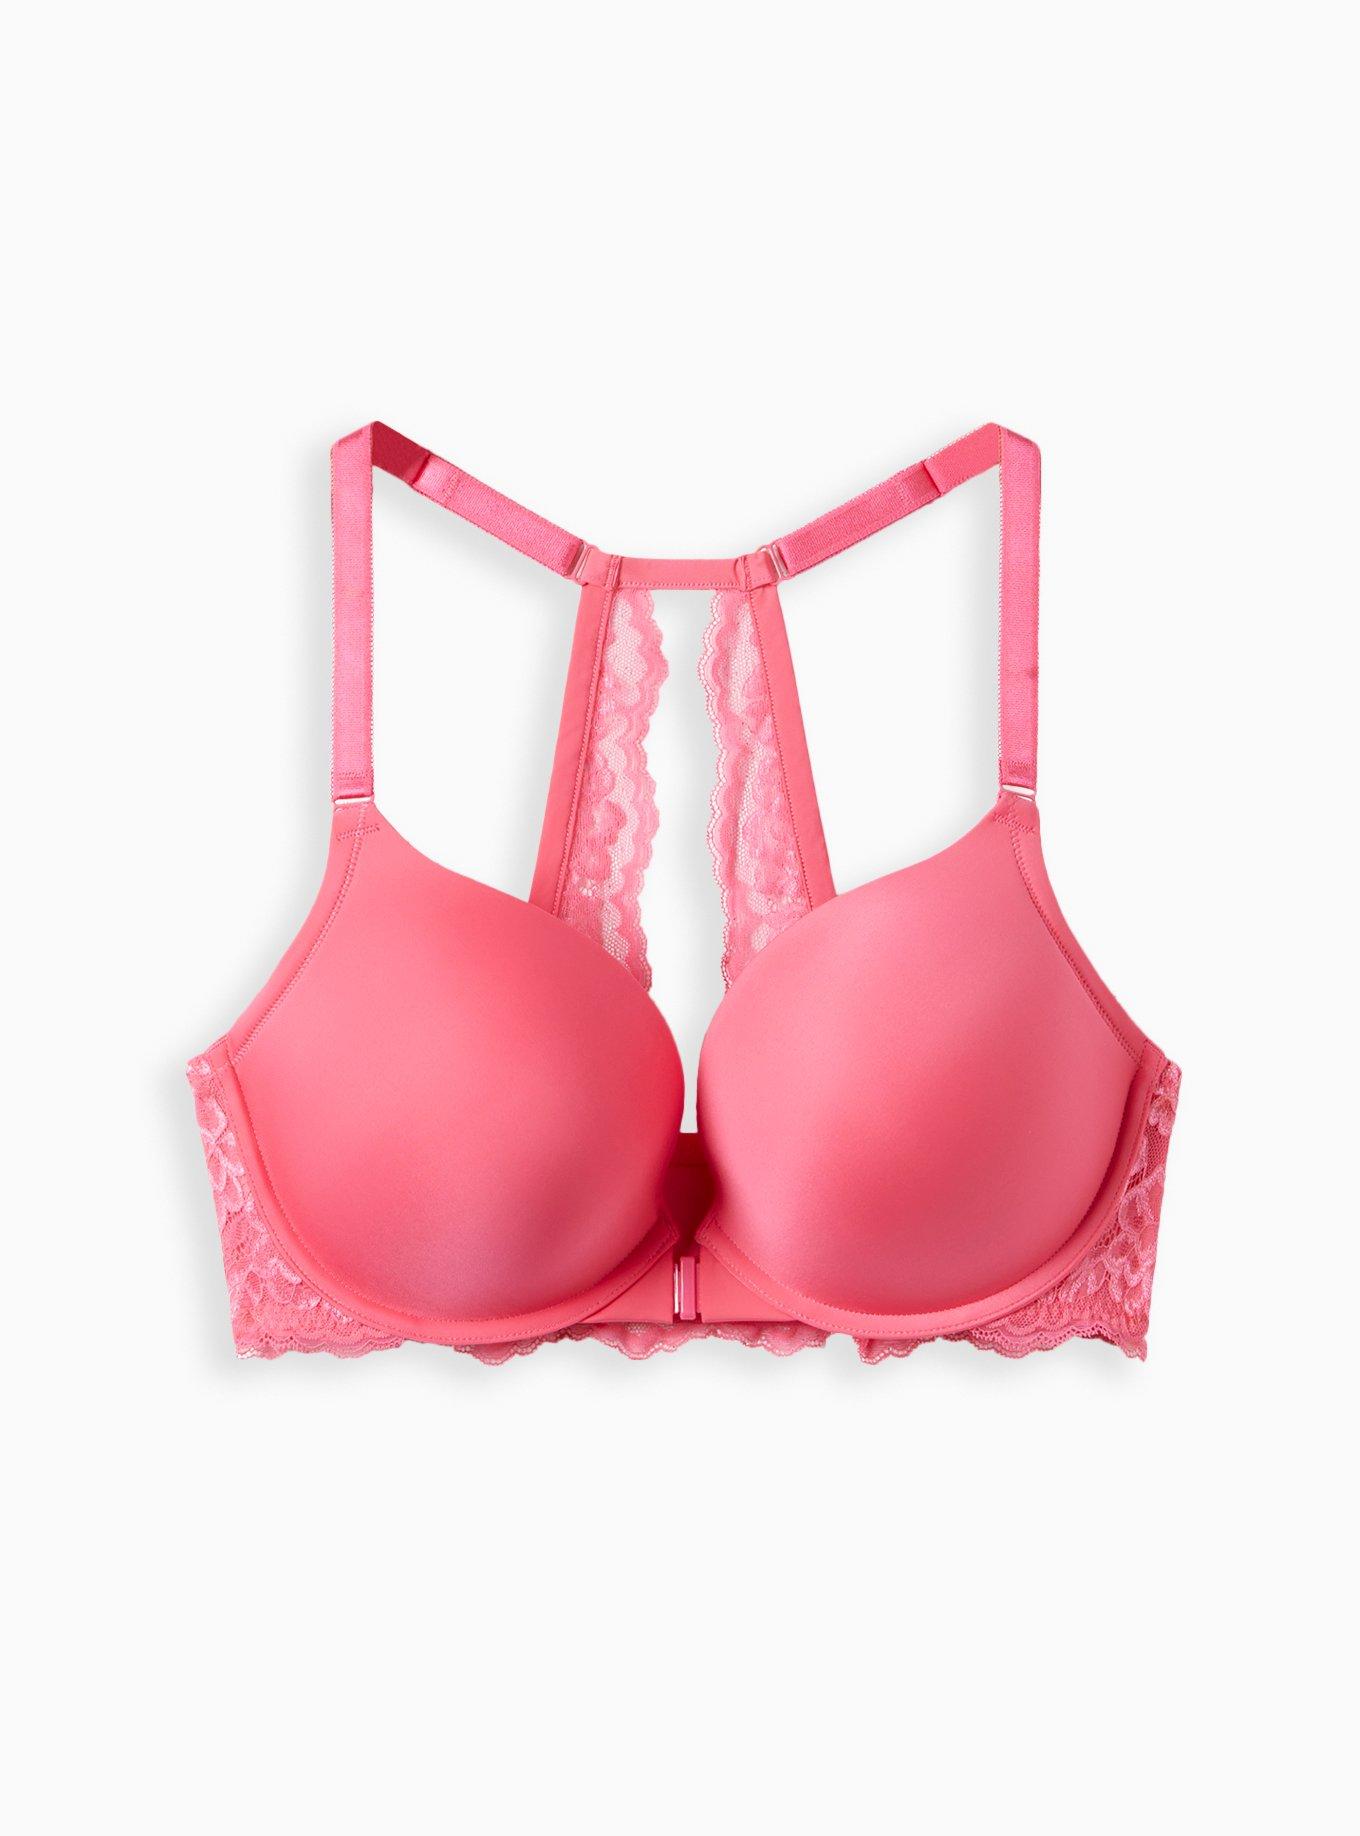 Cacique Smooth Boost Plunge Pink Lace Bra 46DDD